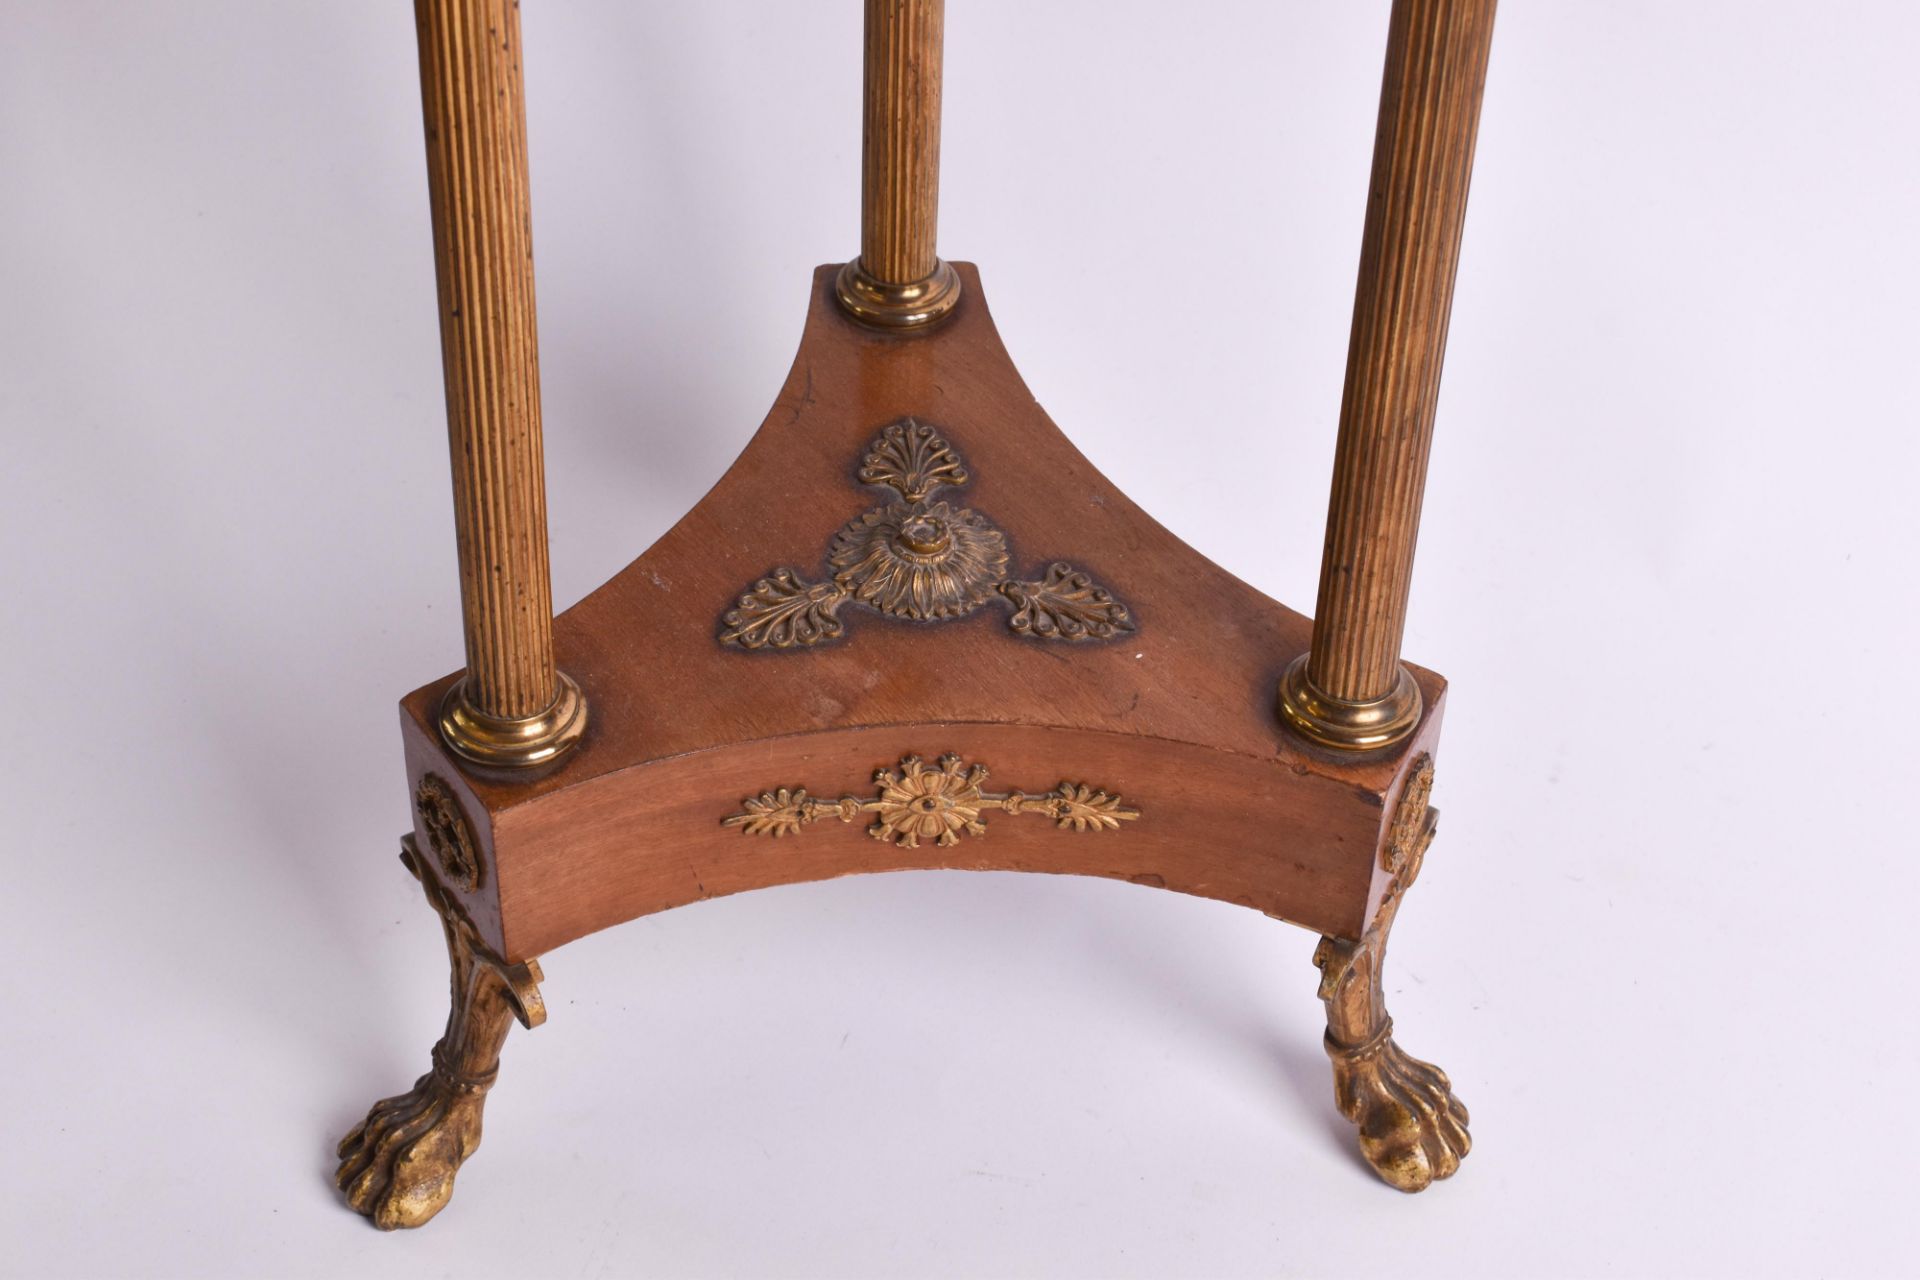 Empire side table made of beech wood & marble, 20th century - Image 2 of 4